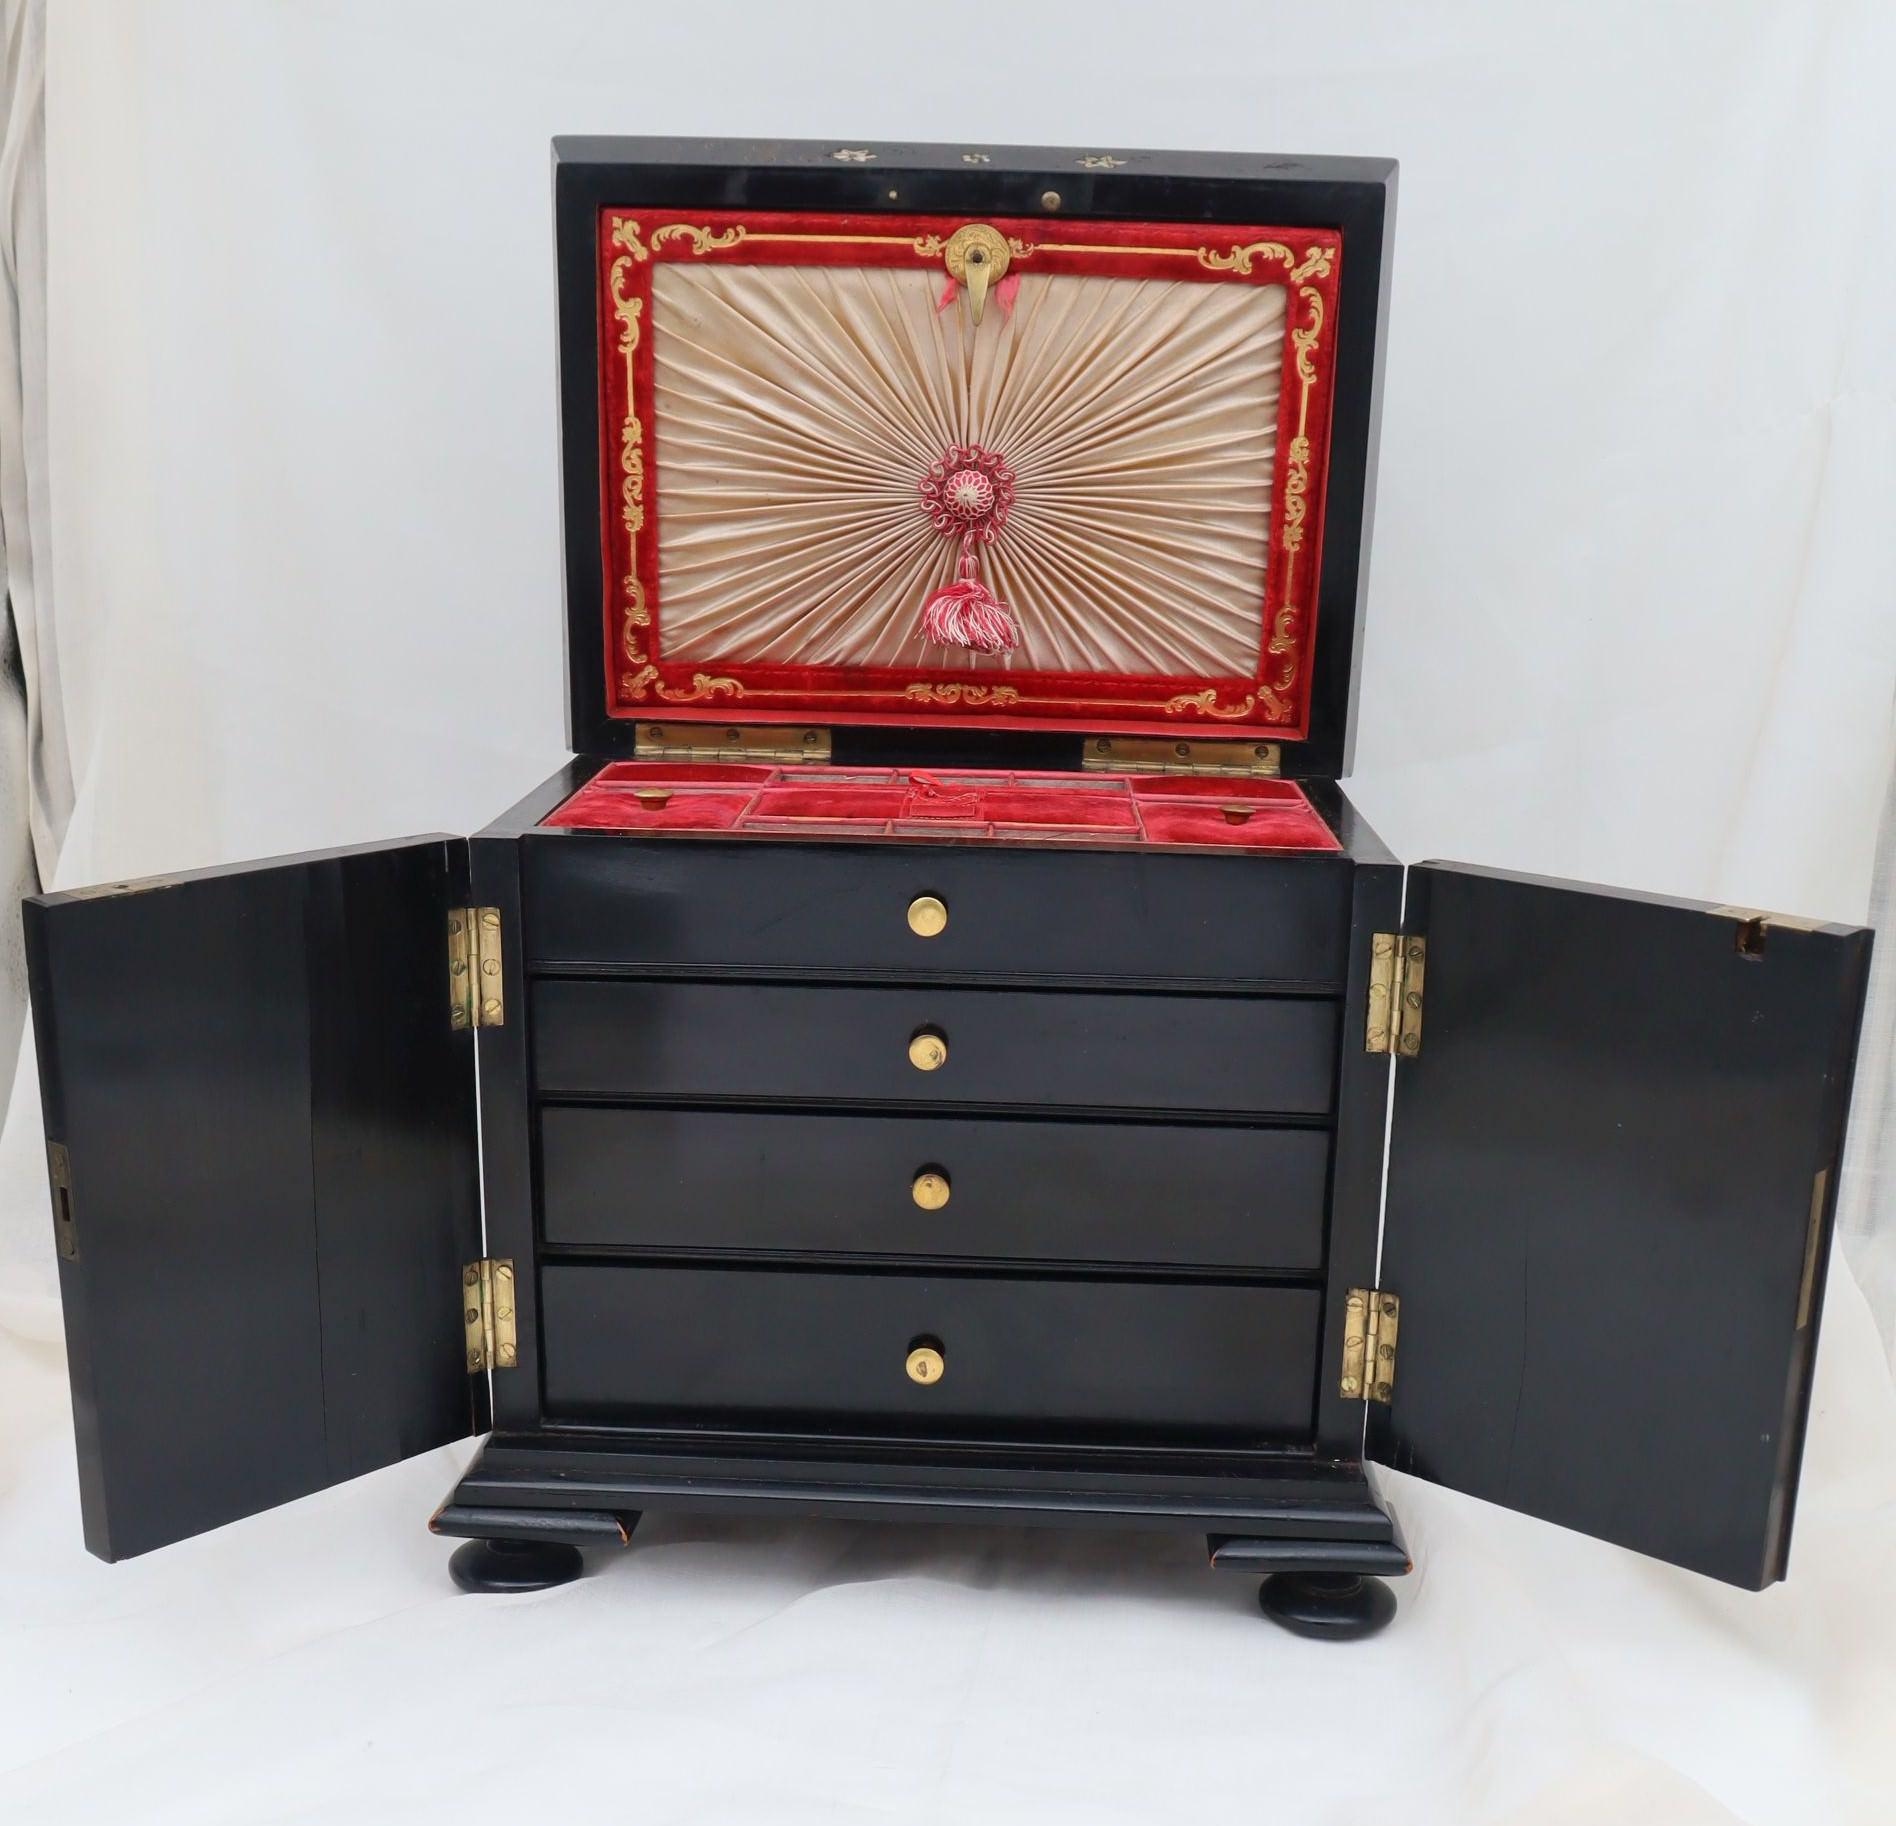 English Ladies table compendium and jewelry box For Sale